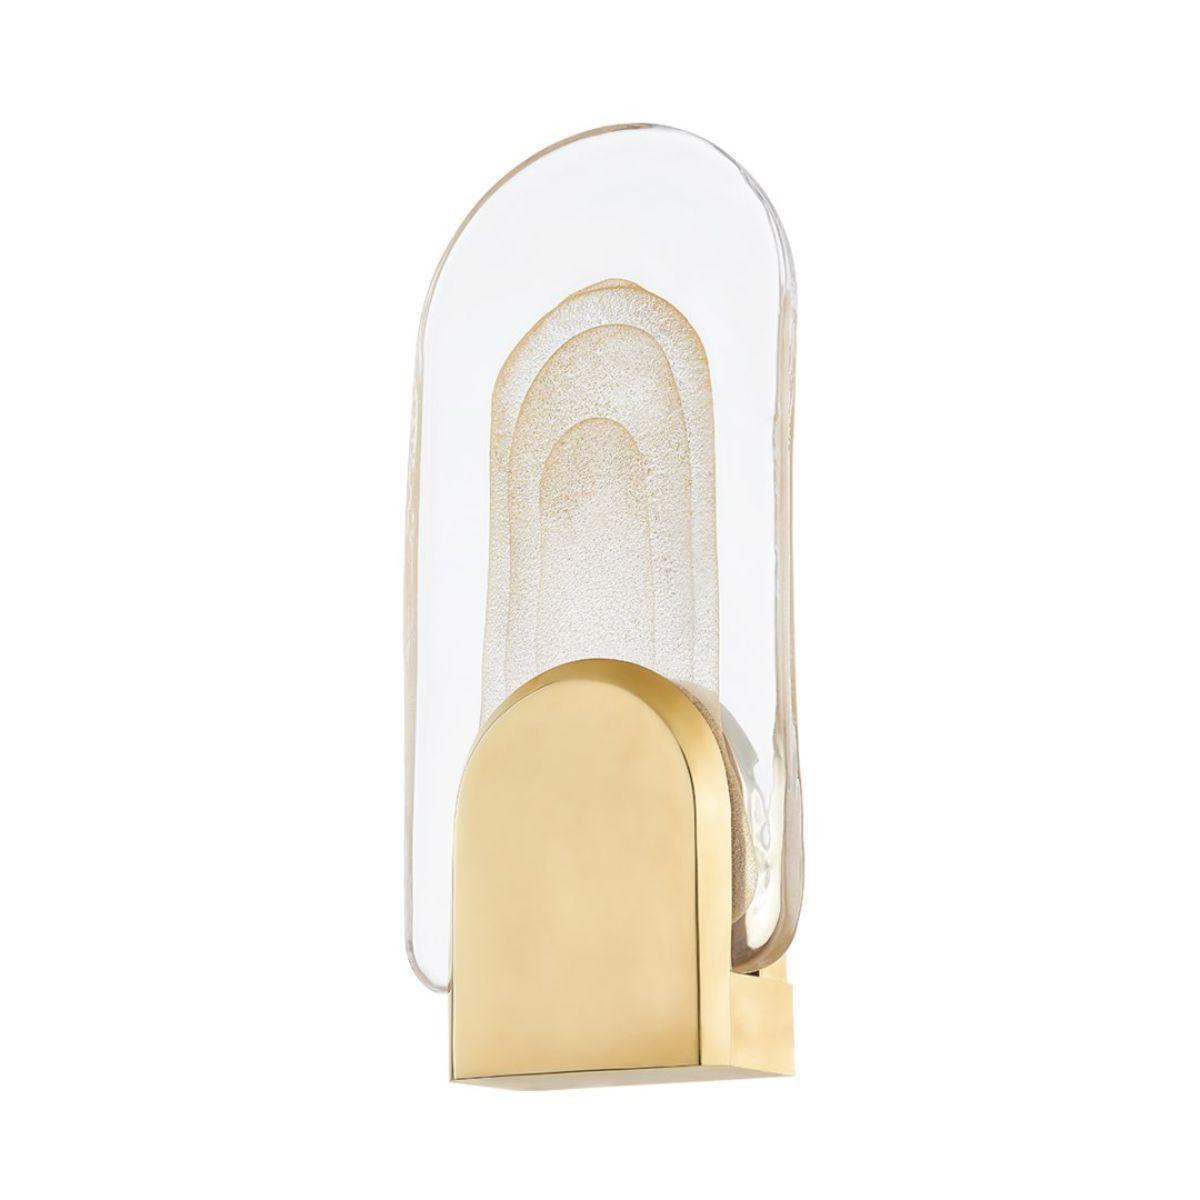 Morganite 17 in. LED Wall Sconce vintage brass Finish